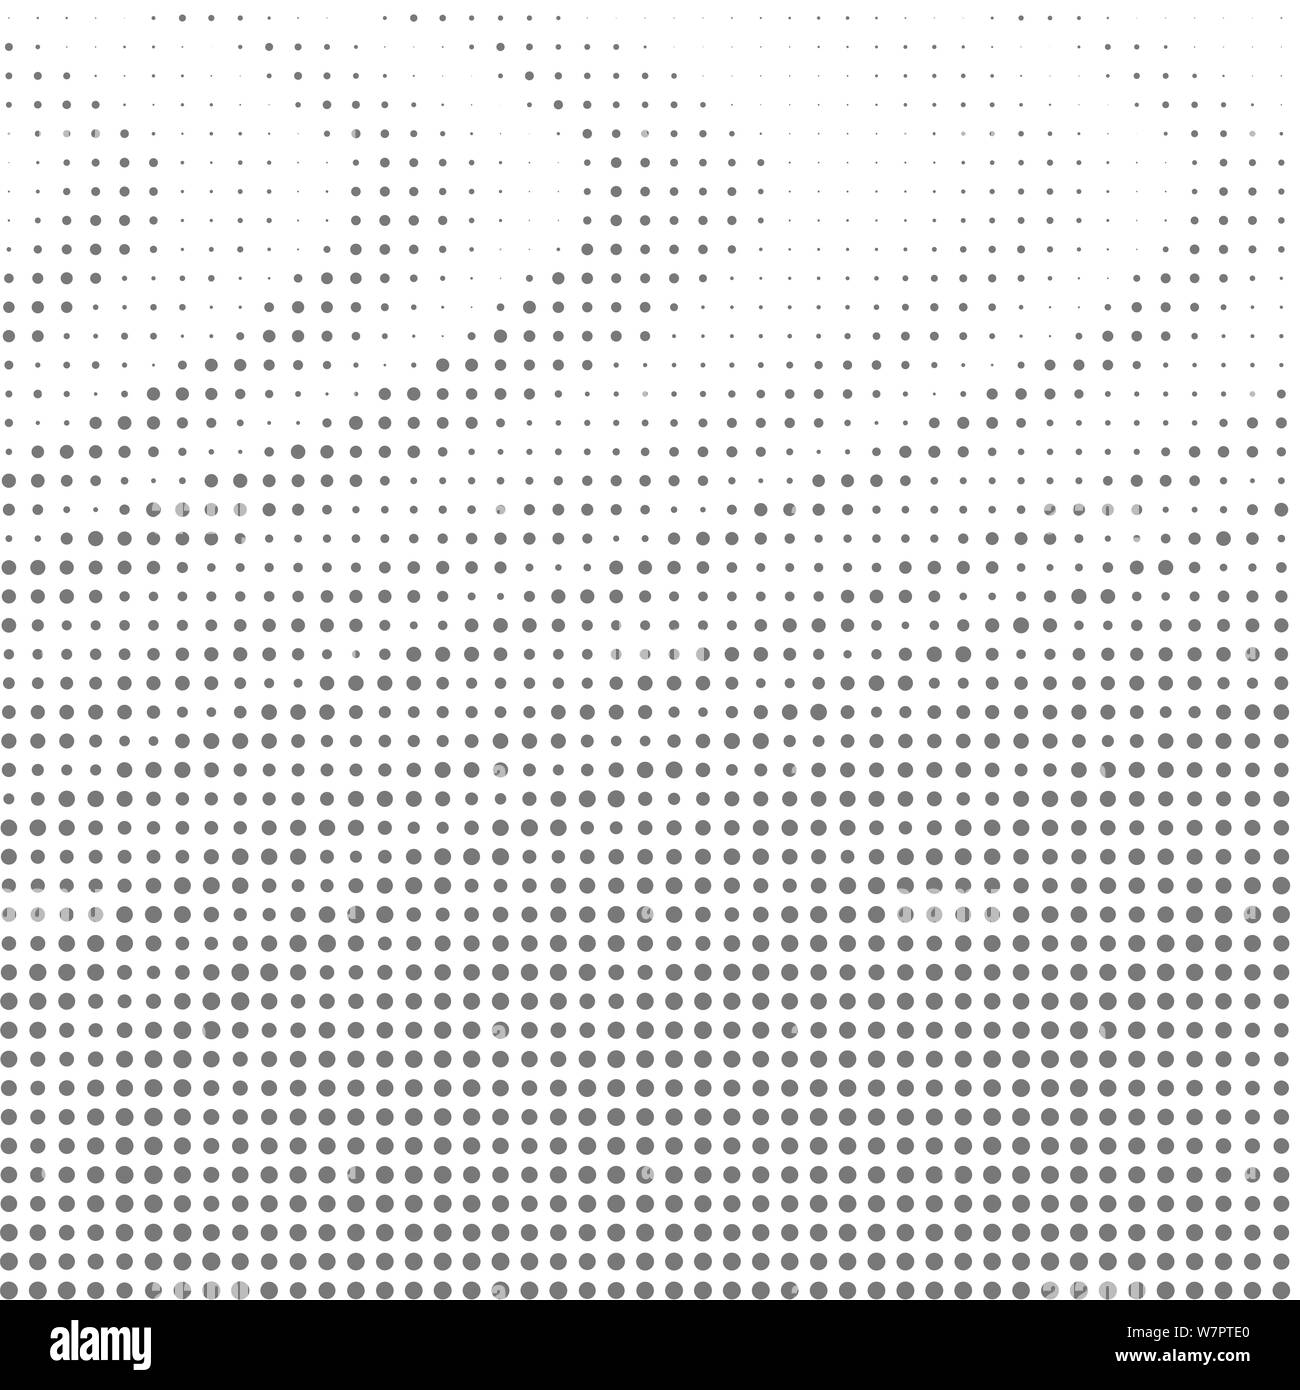 Halftone Pattern. Set of Dots. Dotted Texture on White Background. Overlay  Grunge Template. Distress Linear Design. Fade Monochrome Points. Pop-Art Ba  Stock Photo - Alamy